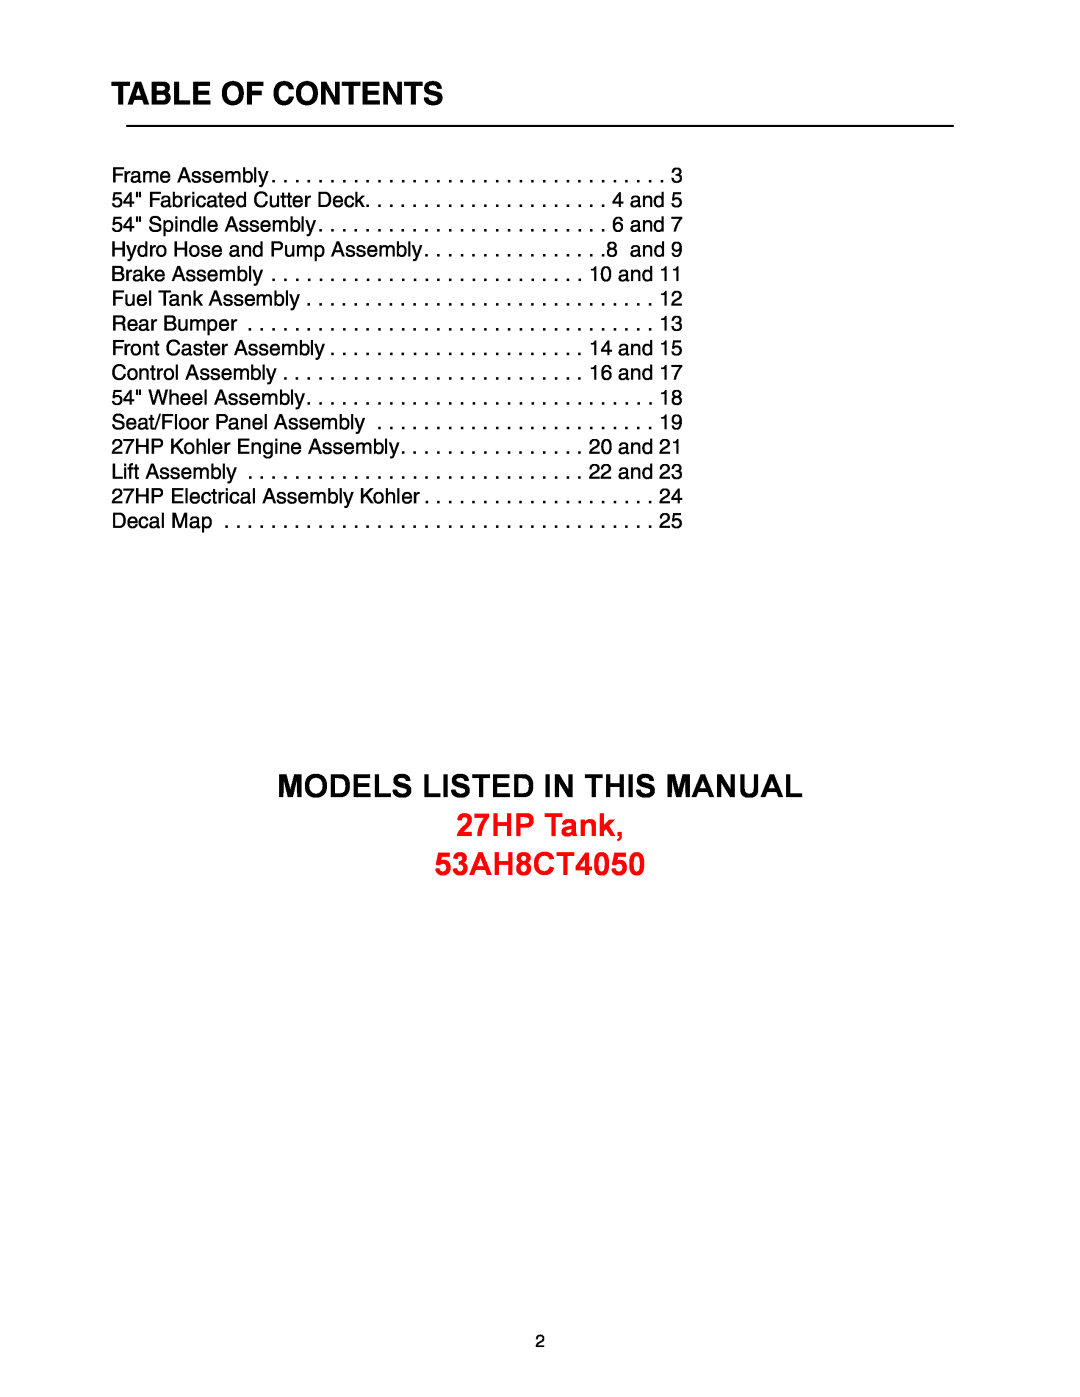 Cub Cadet manual Table Of Contents, Models Listed In This Manual, 27HP Tank 53AH8CT4050 